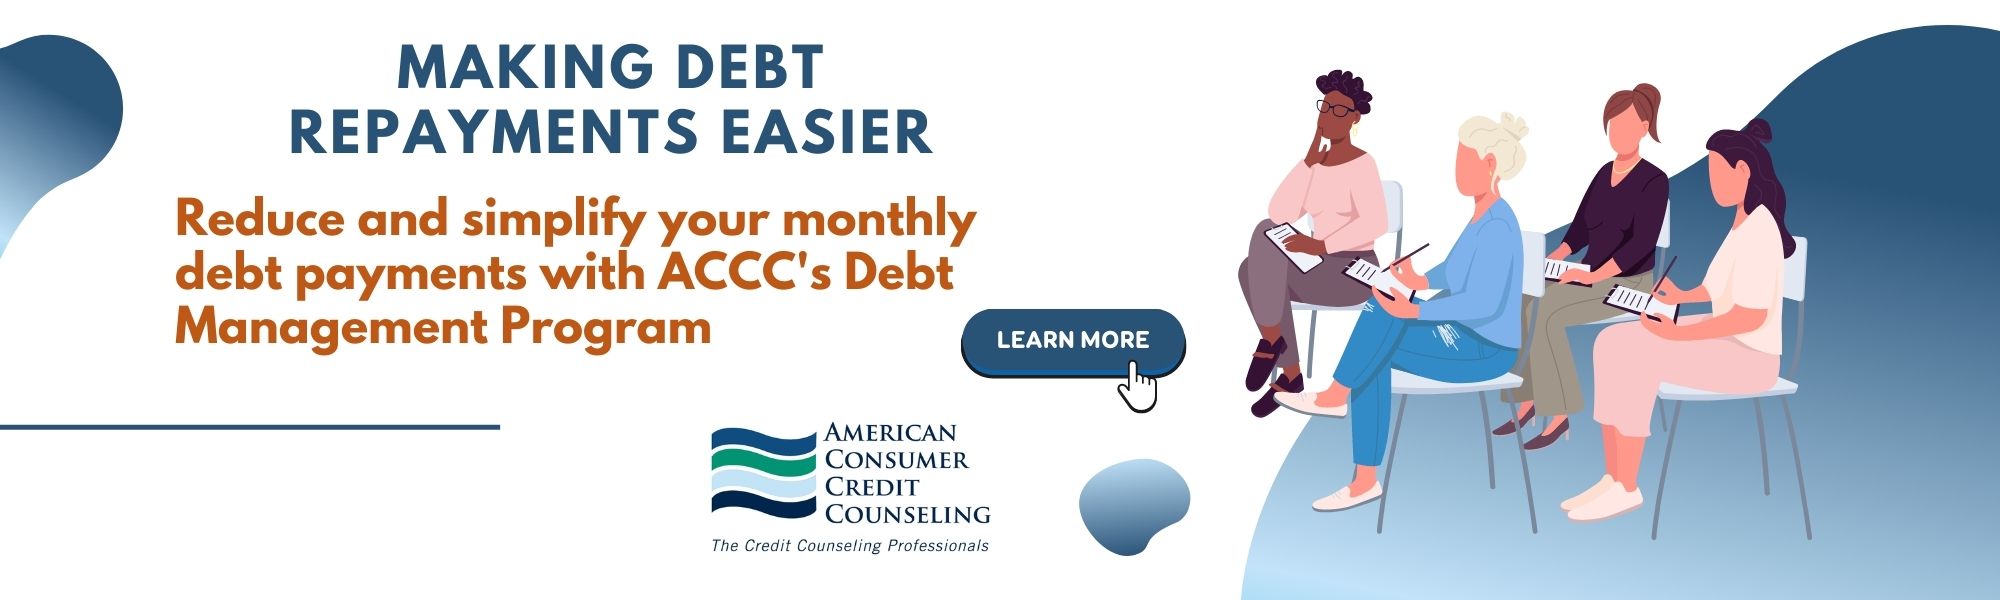 ACCC Debt Management programs help reduce and simplify your monthly debt payments